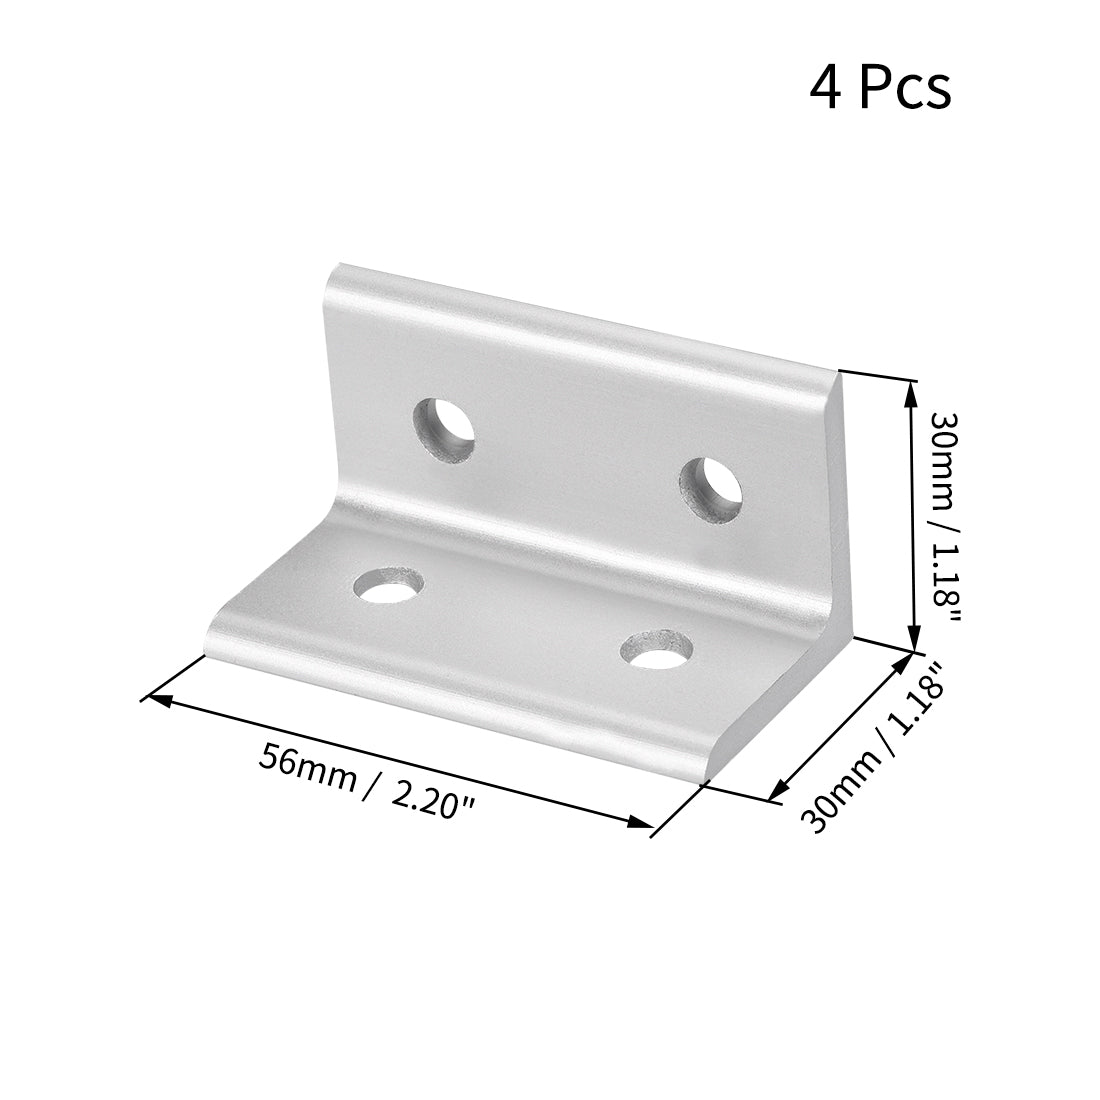 uxcell Uxcell 3060 Inside Corner Bracket for 3030 Series Aluminum Extrusion Profile with Slot 6mm, 4 Pcs